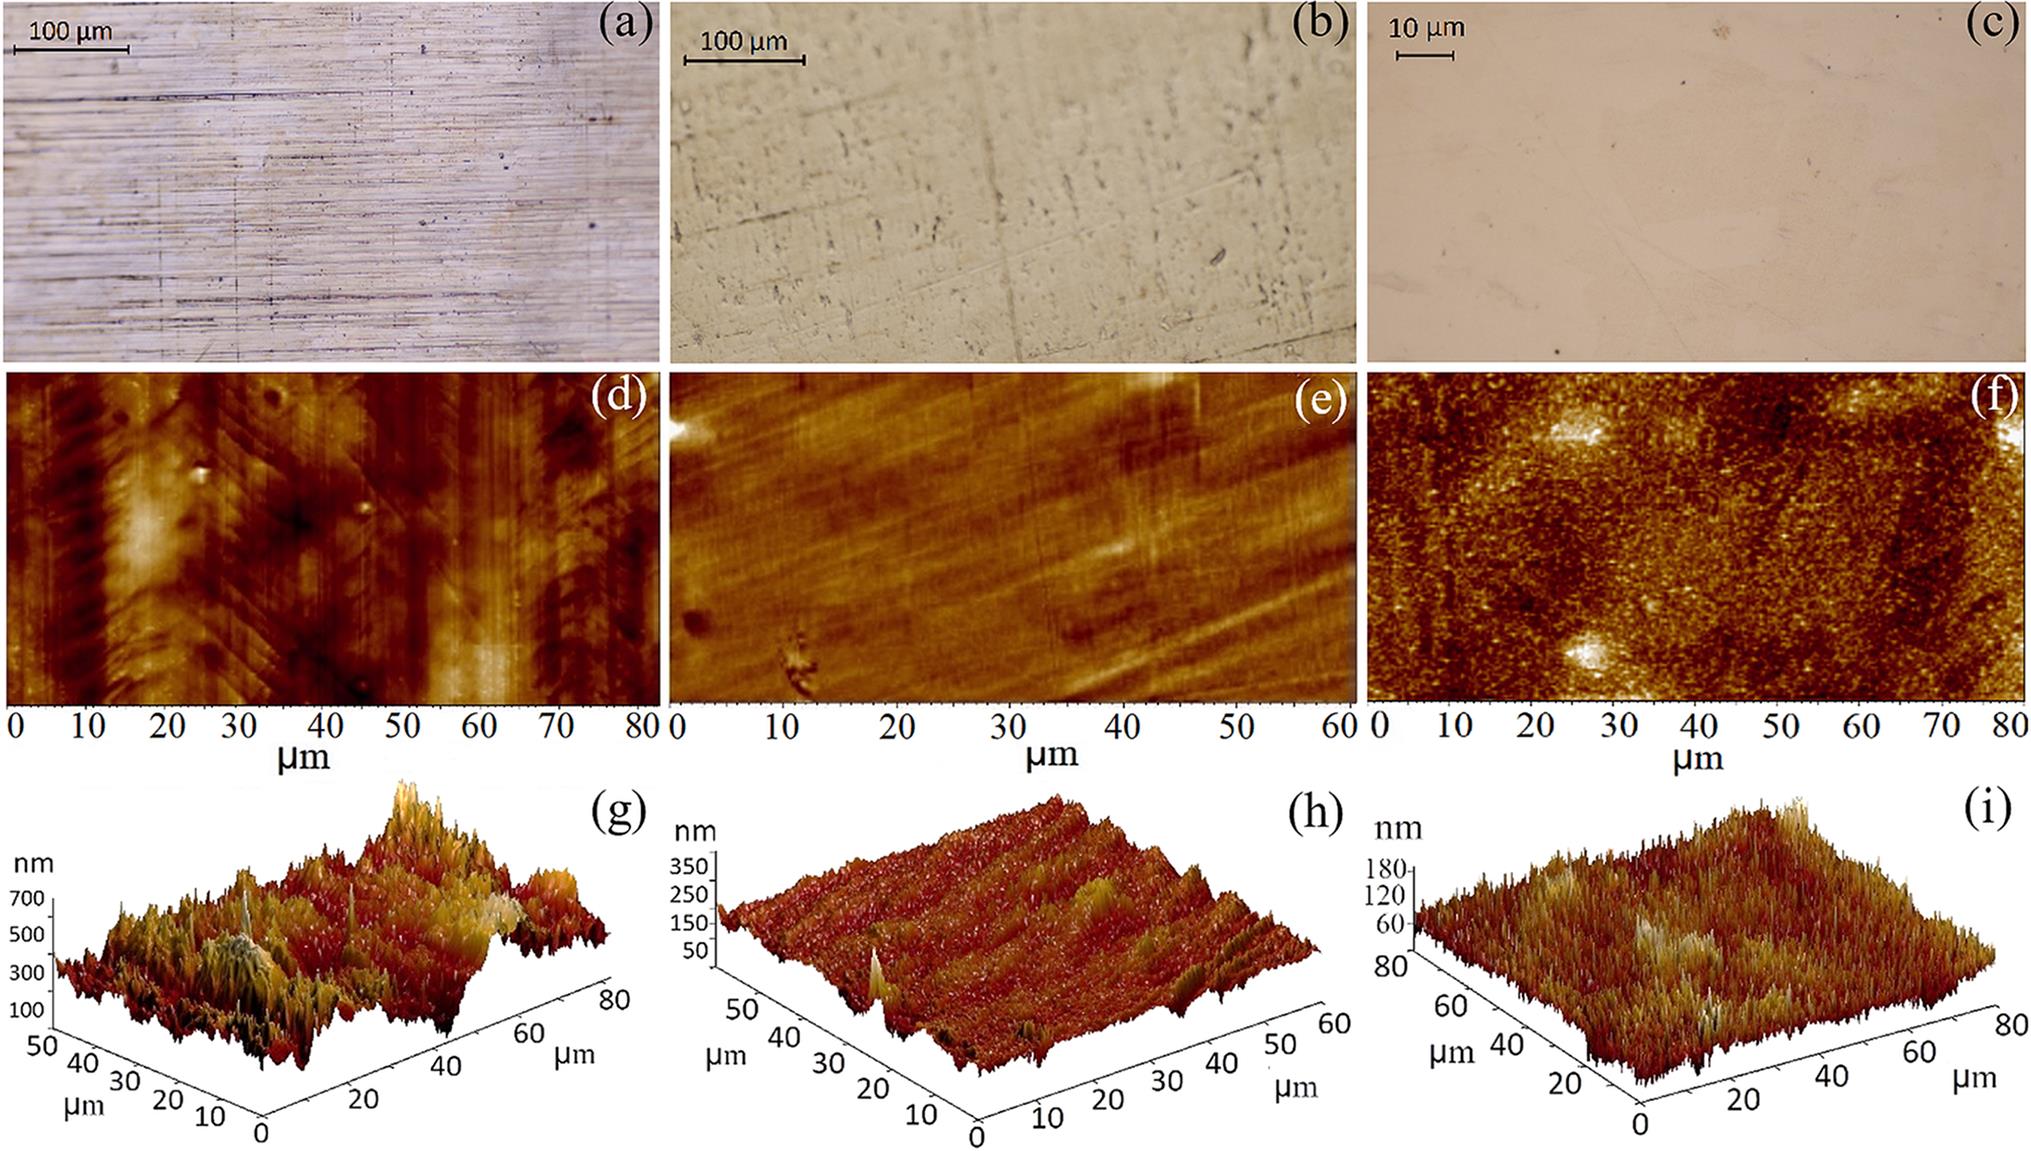 (a)–(c) Optical images, (d)–(f) 2D AFM images and (g)–(i) 3D AFM images of Cu foils: (a), (d), (g) as-received, (b), (e), (h) after cold rolling and (c), (f), (i) after surface cleaning by Ar-ion milling.